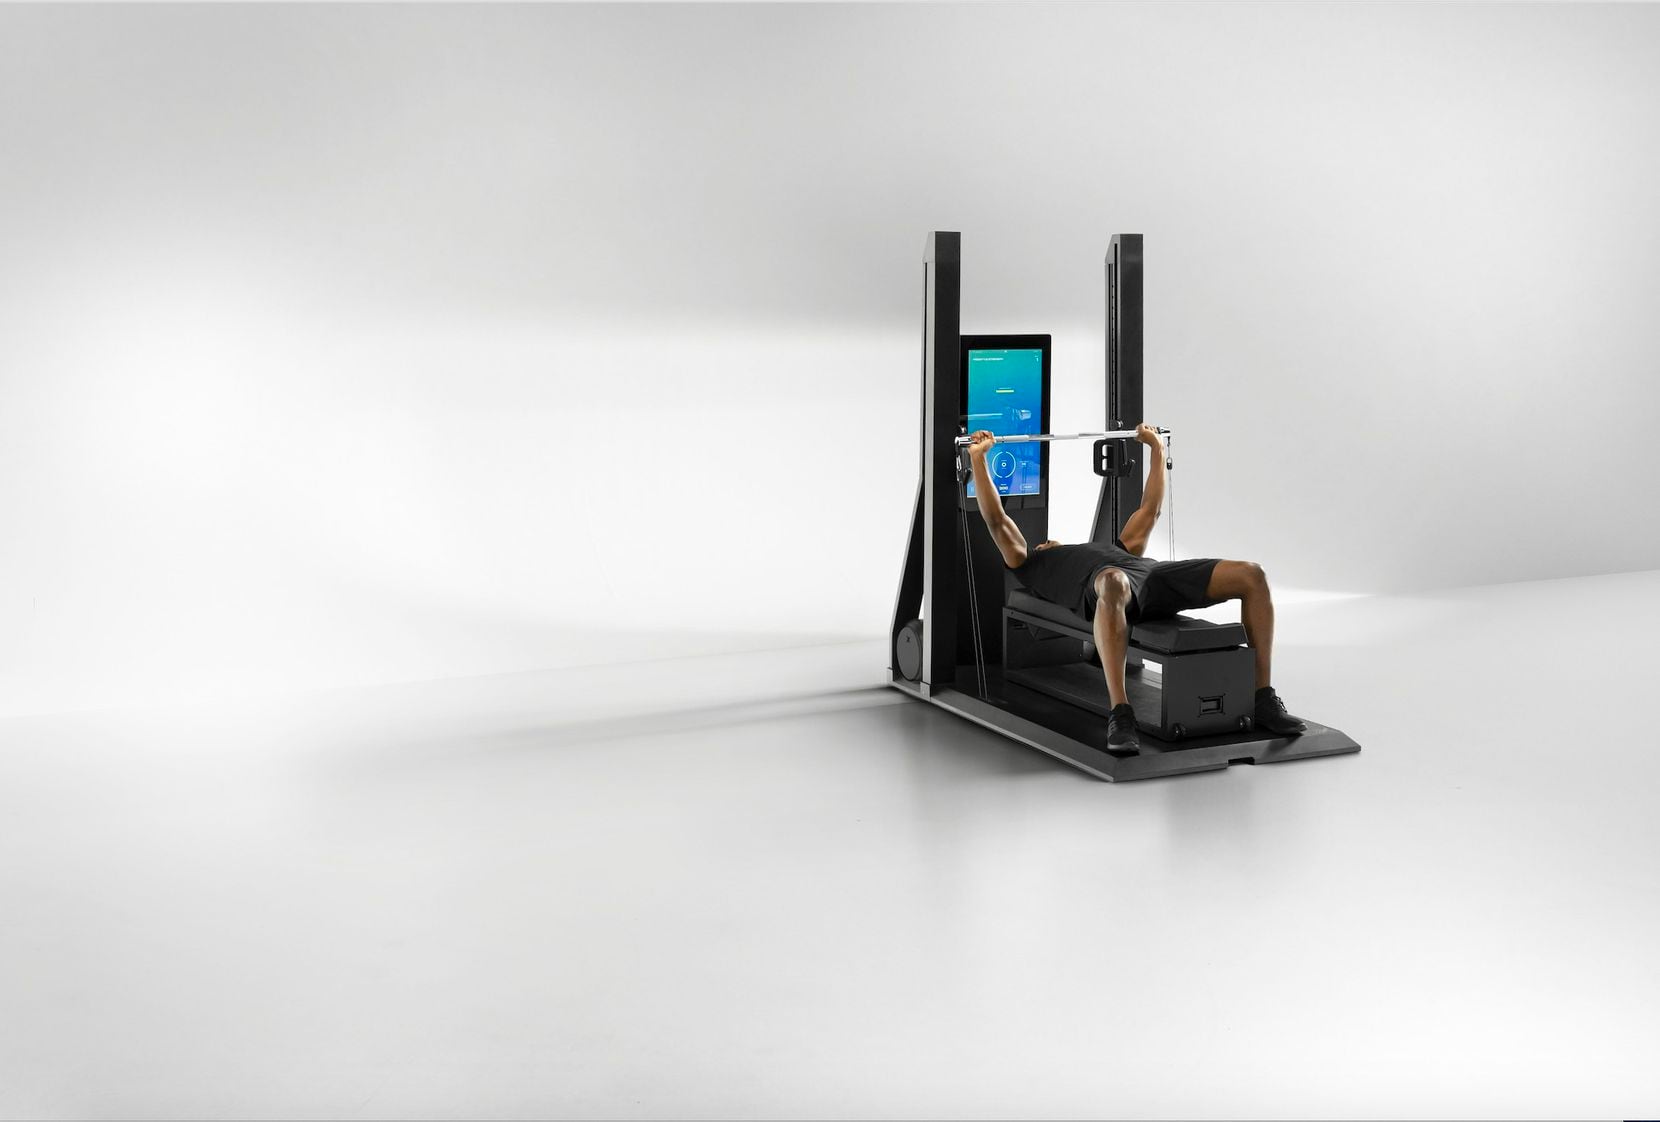 The XS1 is OxeFit's first consumer-focused smart home fitness solution that includes a 32-inch touchscreen. The bench press feature modeled in the picture allows for up to 250 pounds of weight resistance.